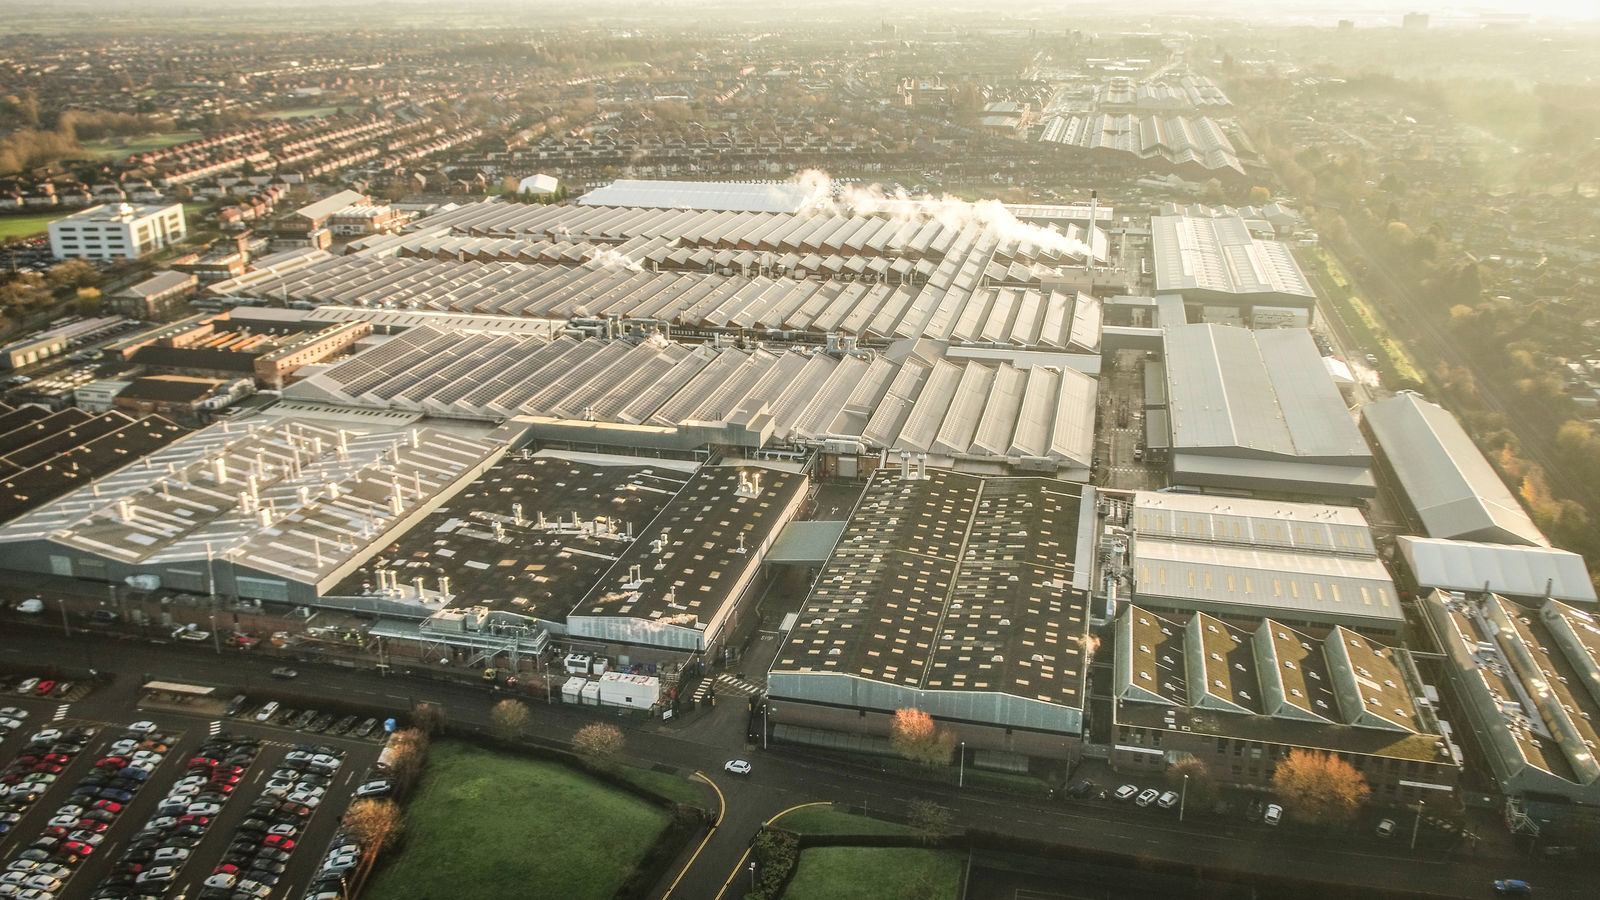 Bentley Motors’ Headquarters and Main Plant now CO2 neutral